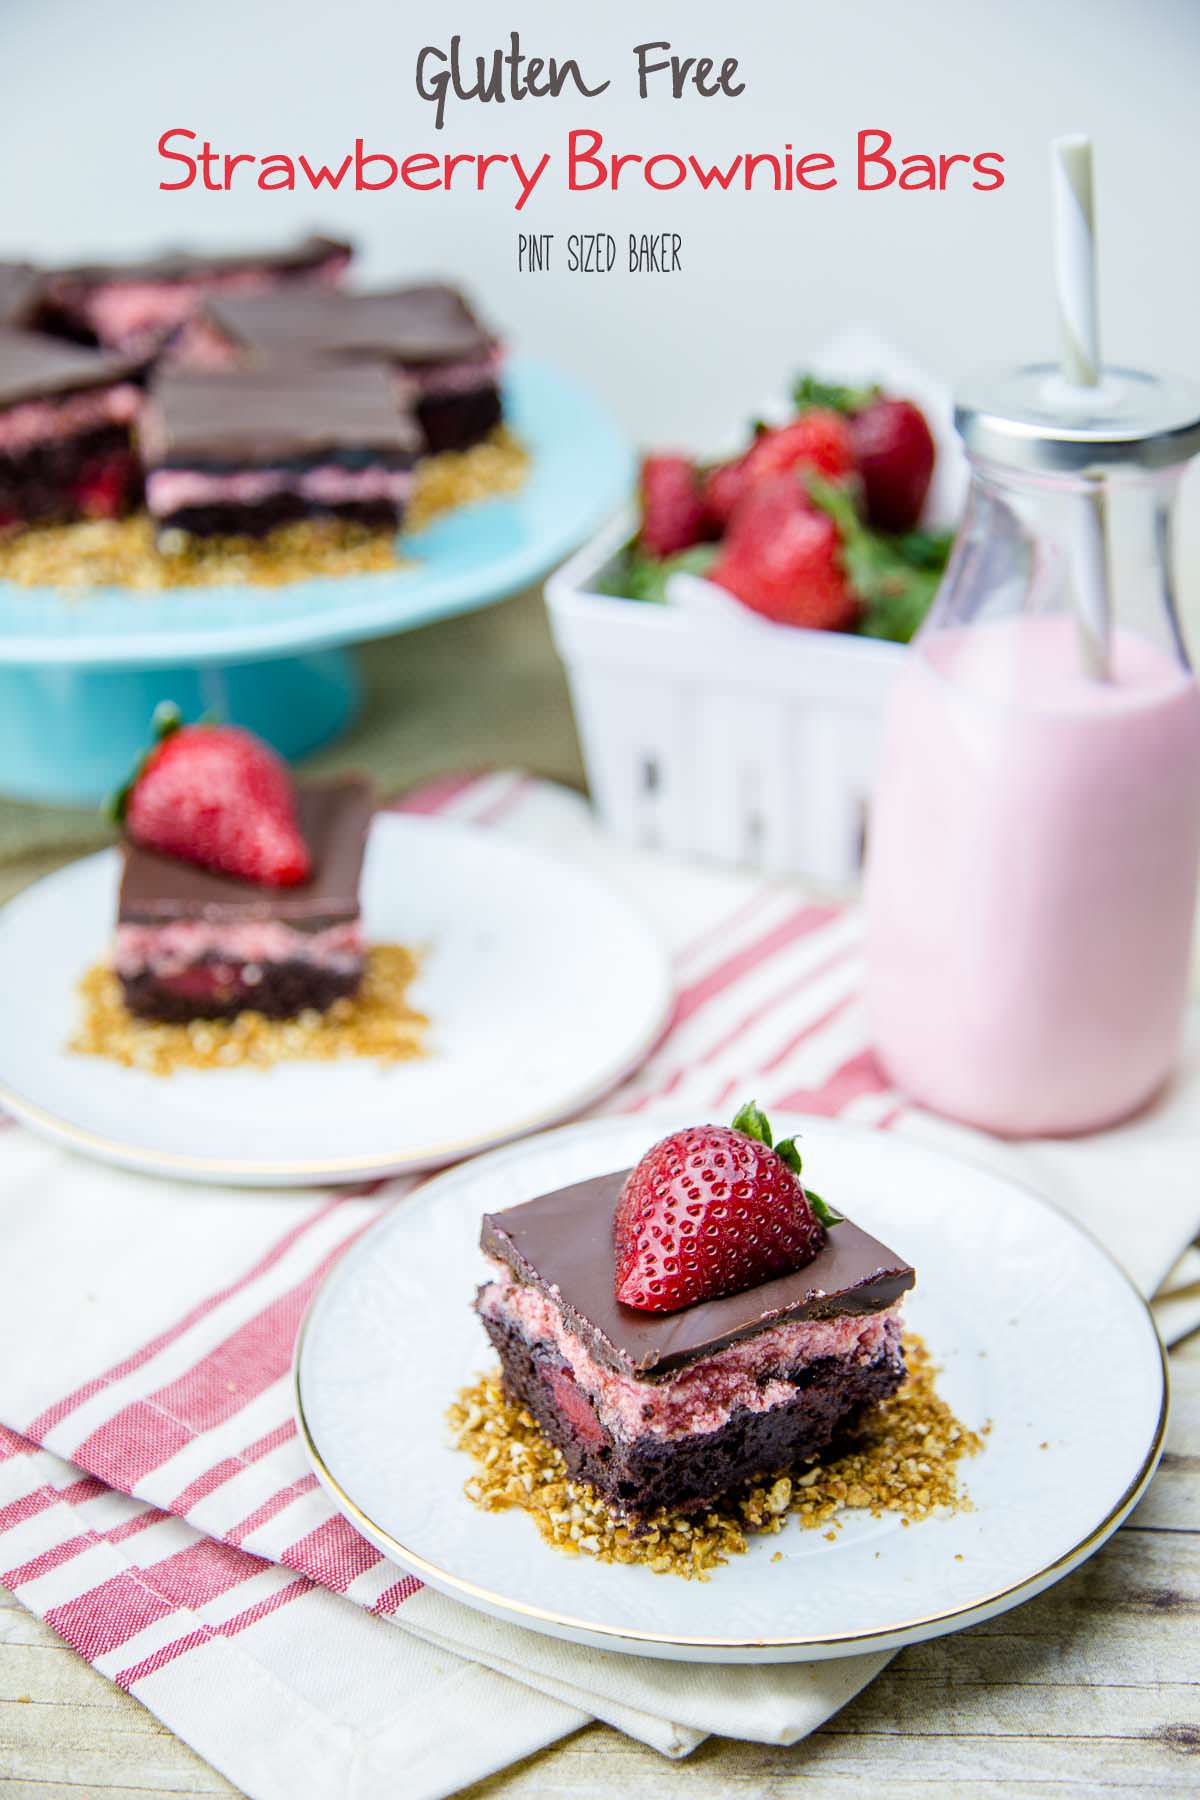 I'm making these easy Gluten Free Strawberry Brownie Bars so that everyone can enjoy some. (They don't have to know they are GF.)